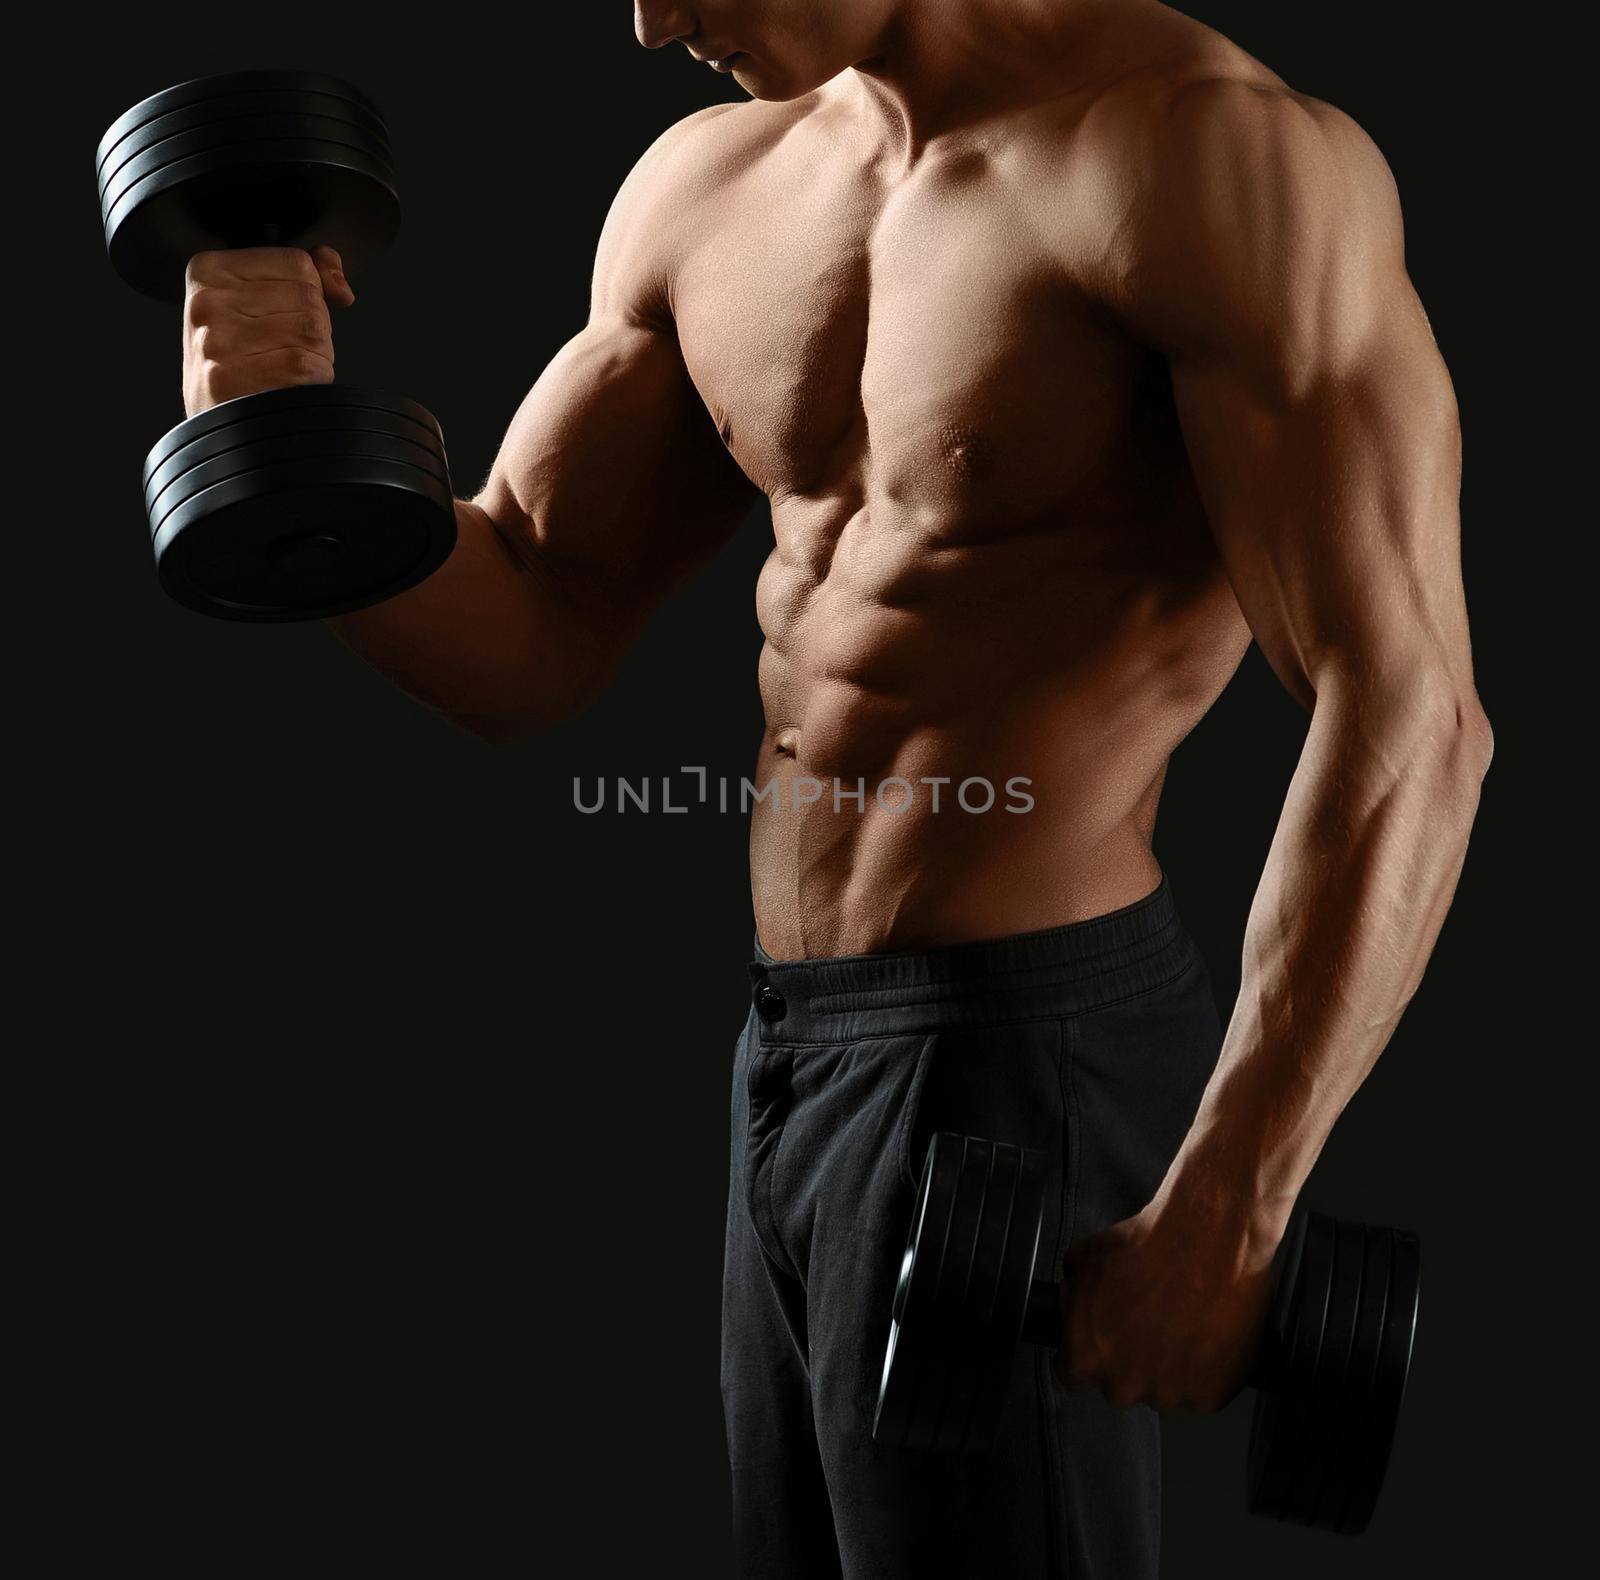 Muscles burning. Cropped shot of a shirtless bodybuilder working out with dumbbells showing off his toned torso